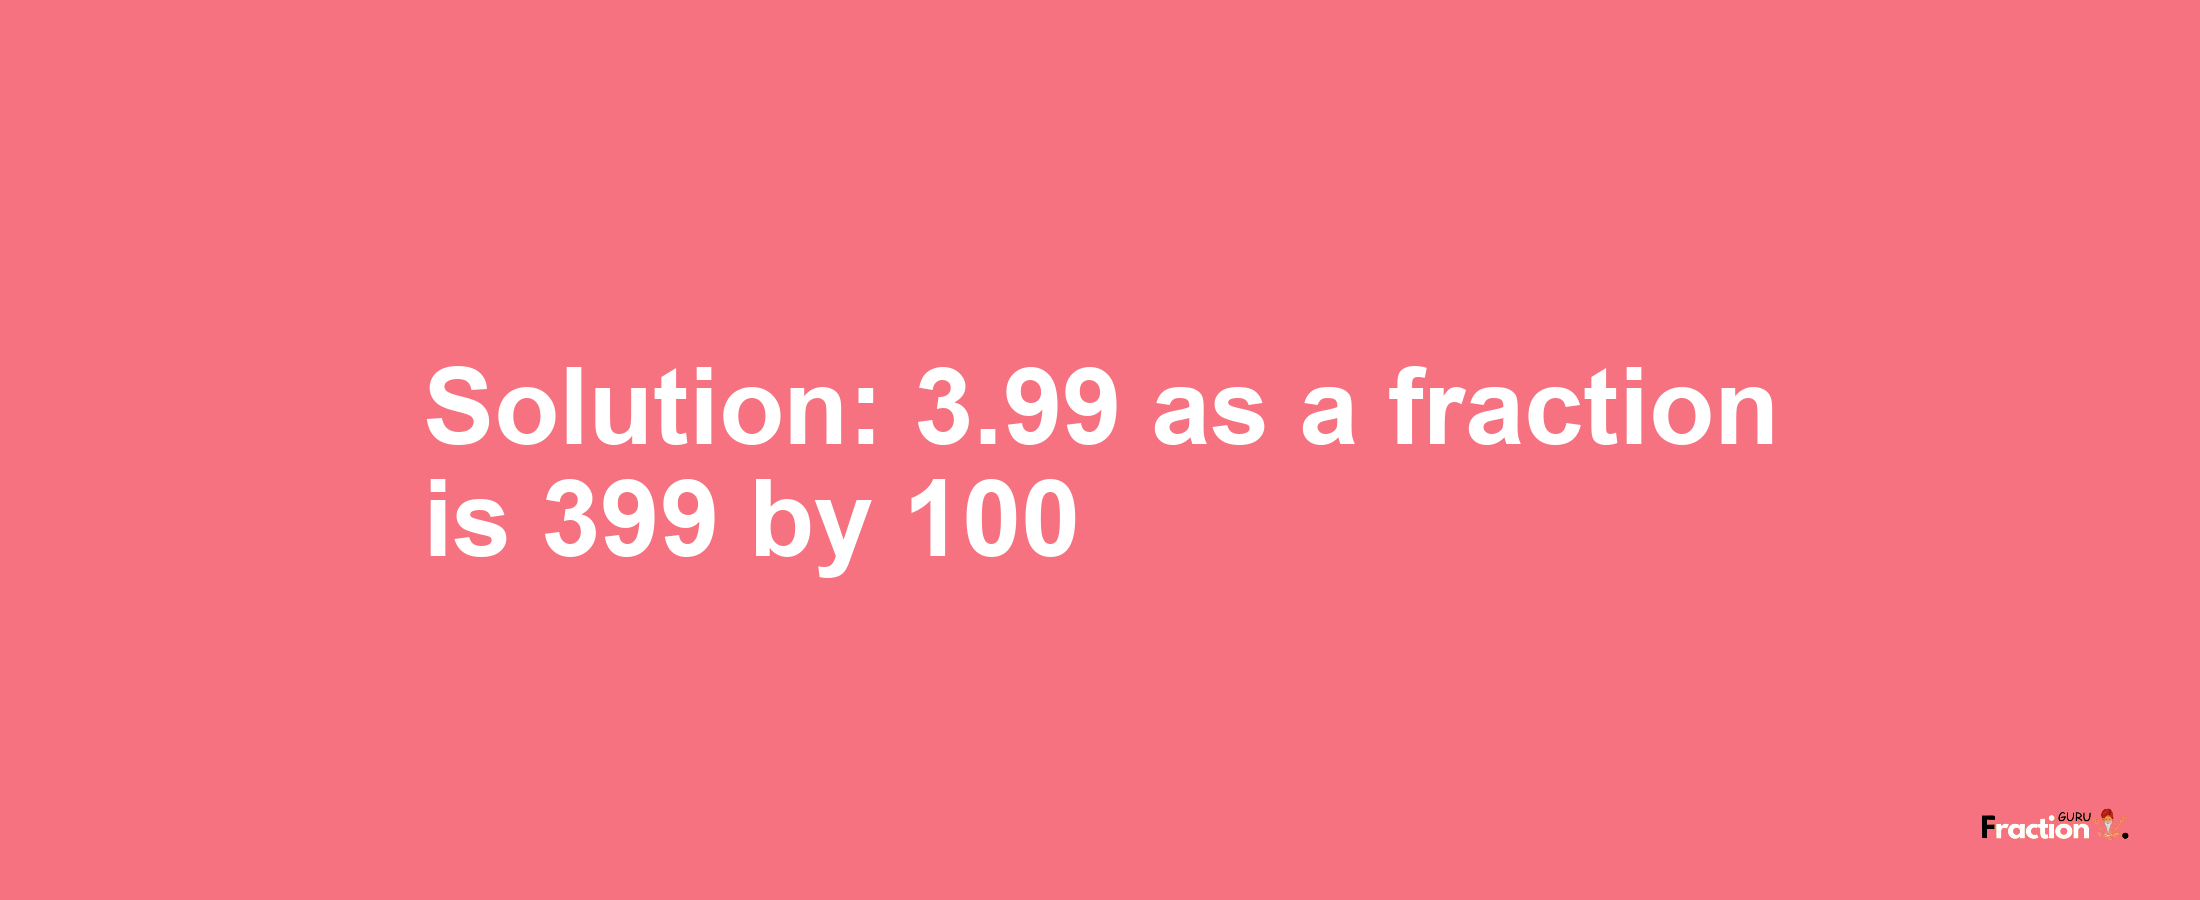 Solution:3.99 as a fraction is 399/100